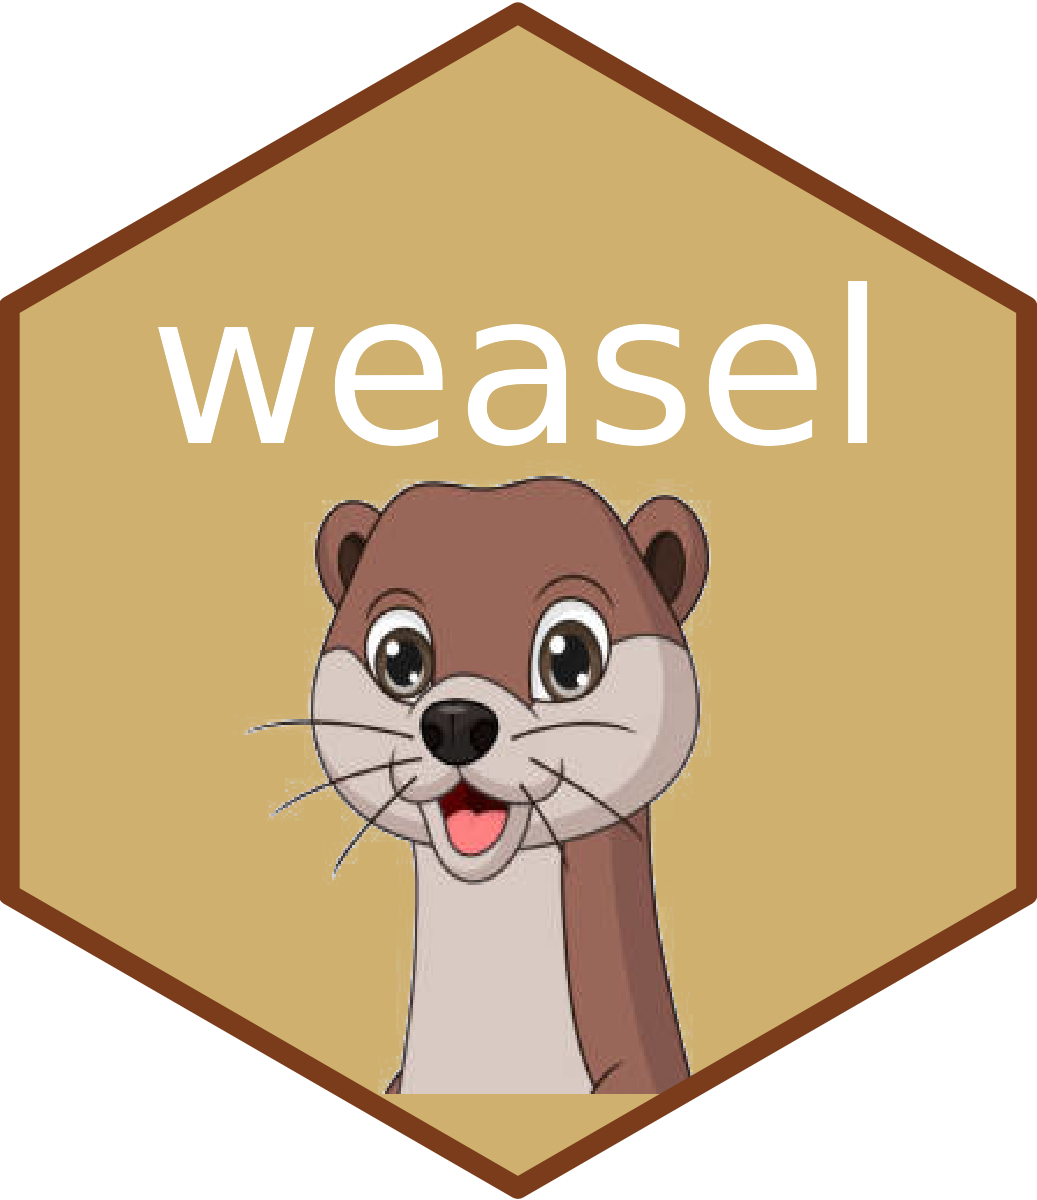 pop() goes the {weasel}